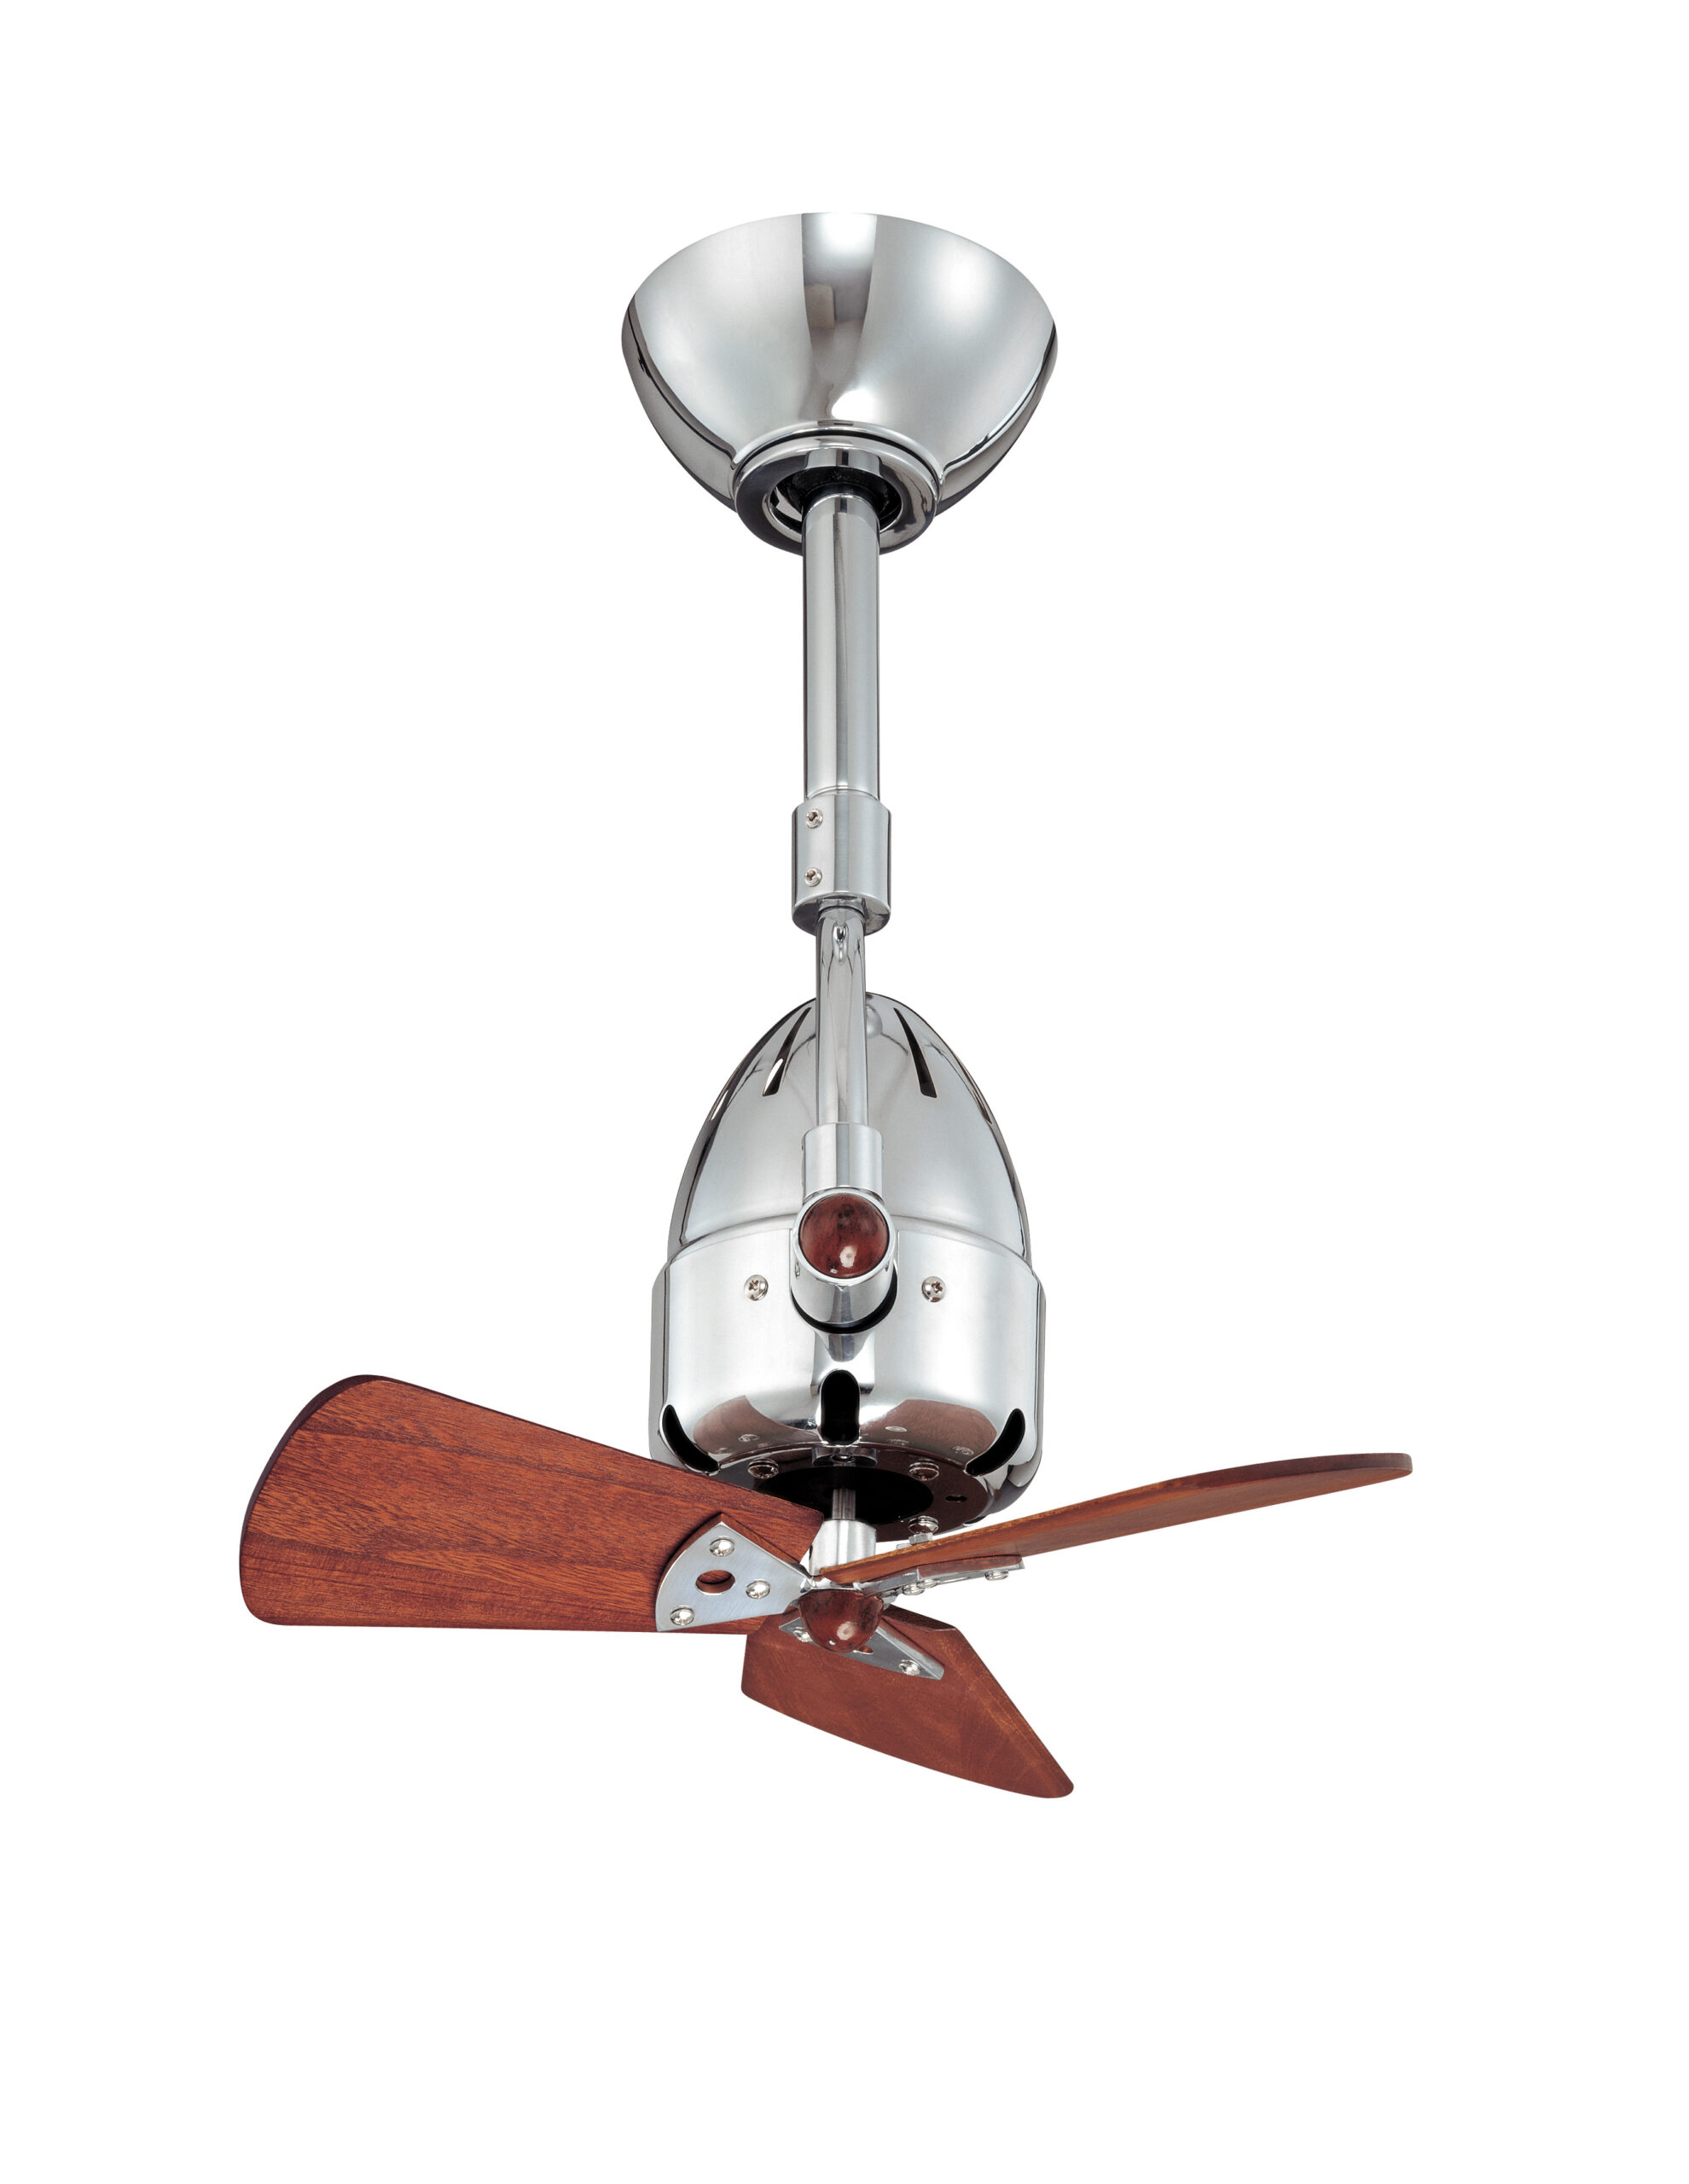 Diane ceiling fan in Polished Chrome with Mahogany wood blades